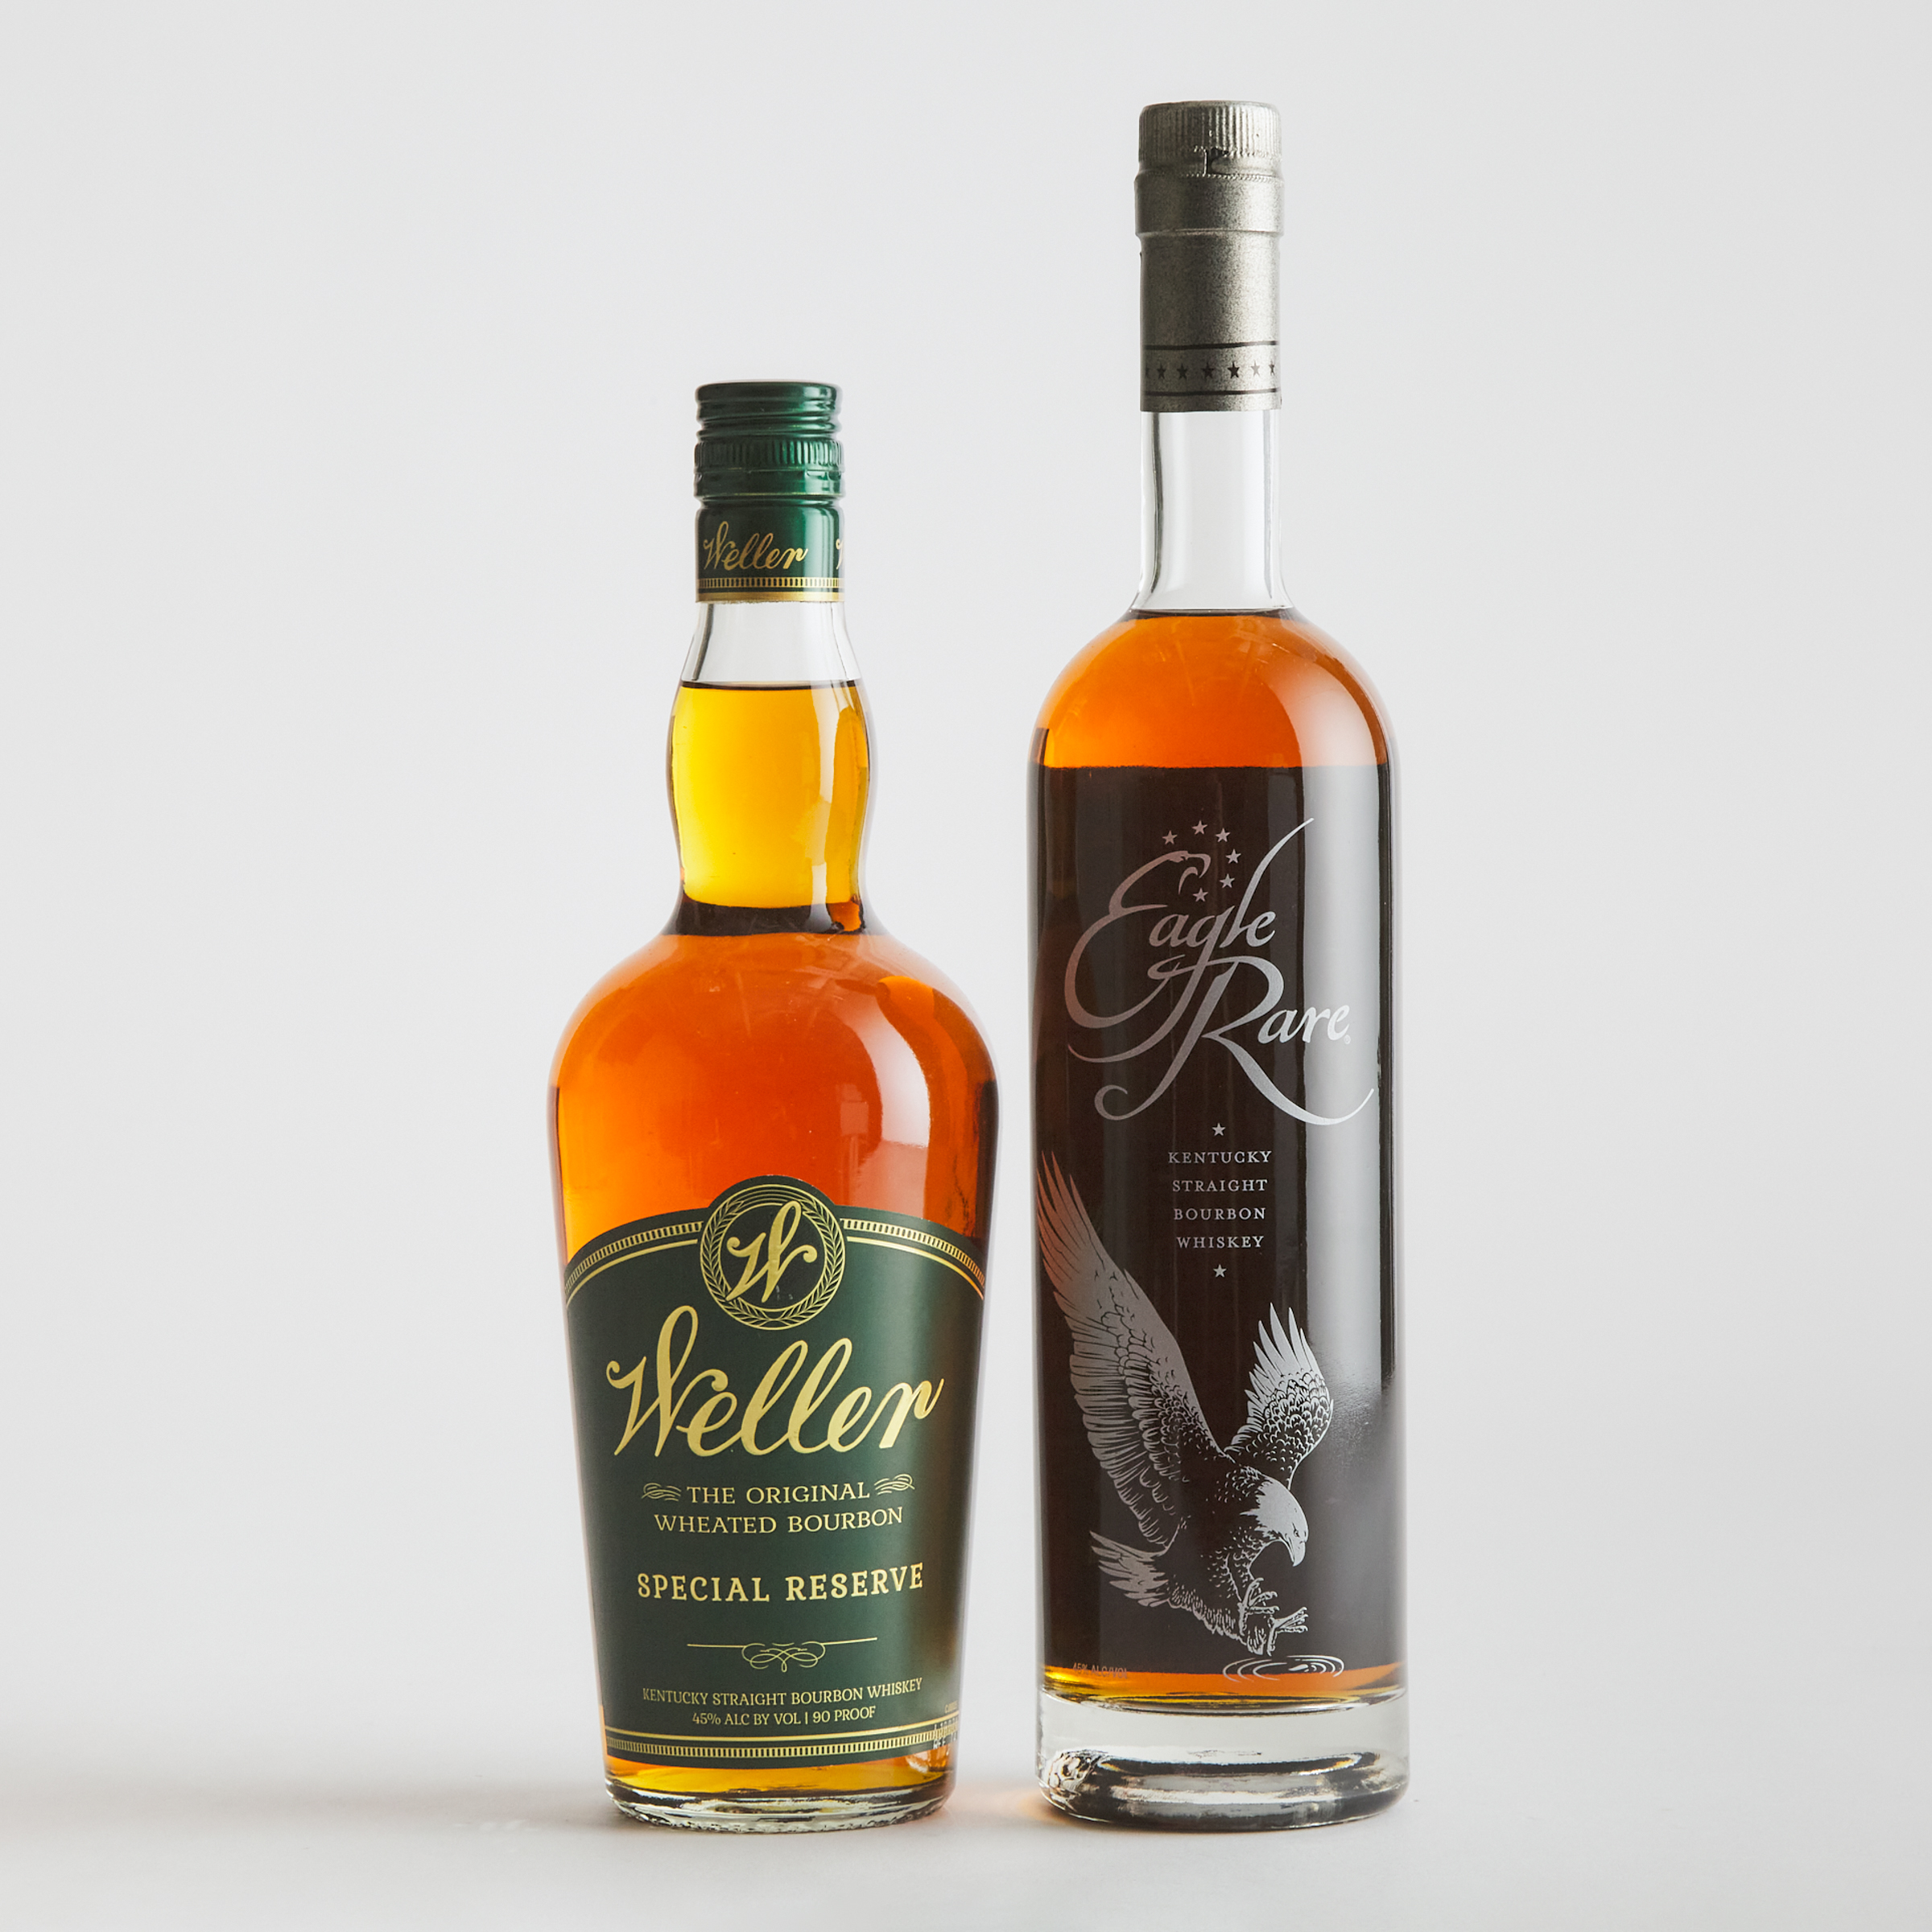 EAGLE RARE KENTUCKY STRAIGHT BOURBON WHISKEY 10 YEARS (ONE 750 ML)
WELLER SPECIAL RESERVE KENTUCKY STRAIGHT BOURBON WHISKEY (ONE 750 ML)